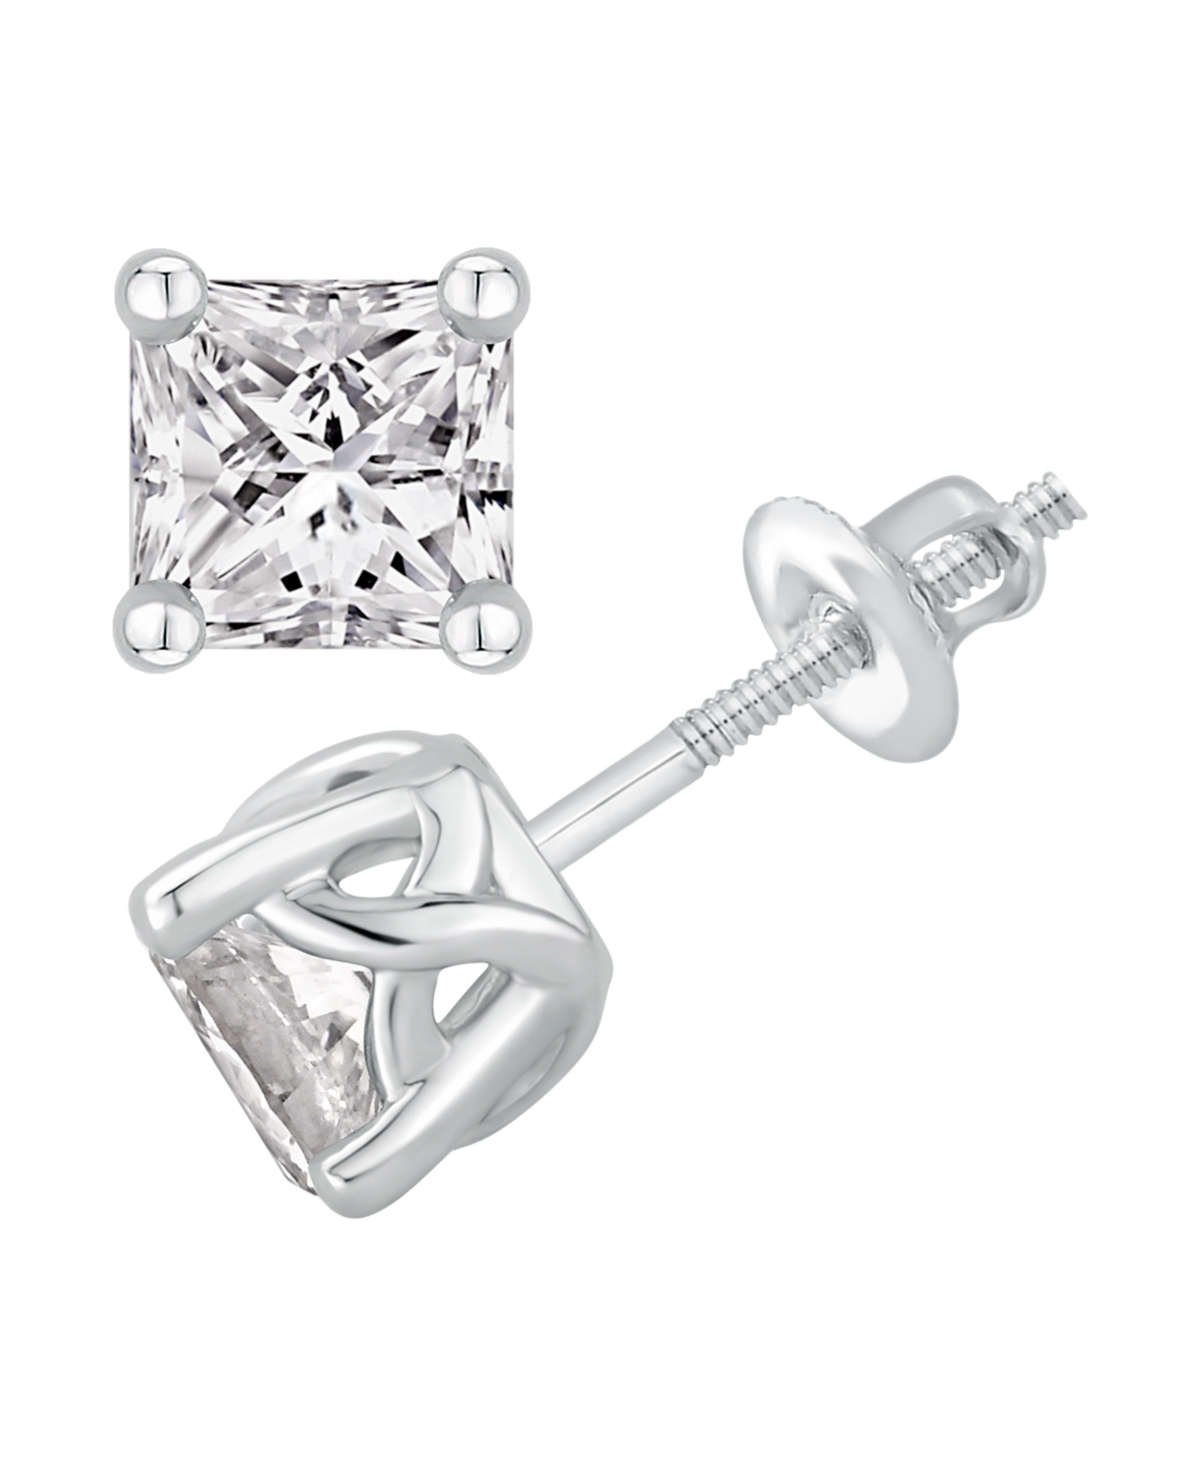 Gia Certified Diamond Princess Stud Earrings (1 1/2 ct. t.w.) in 14K White Gold - White Gold